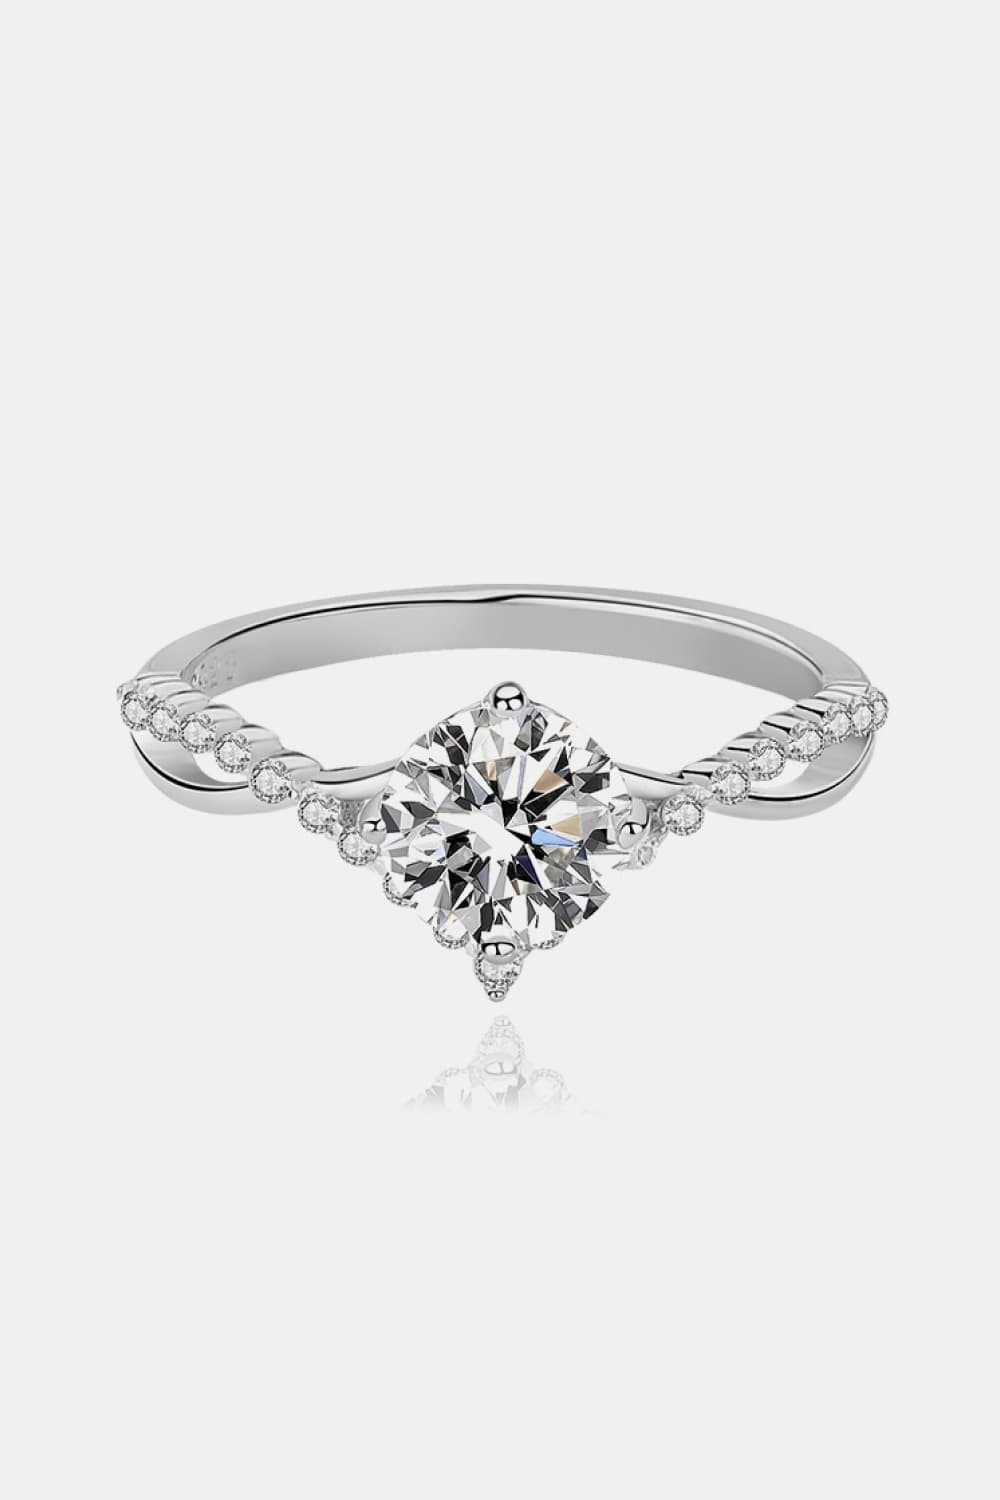 1 Carat Round Brilliant Cut Moissanite Platinum Over Pure Sterling Silver Ring - Sparkala